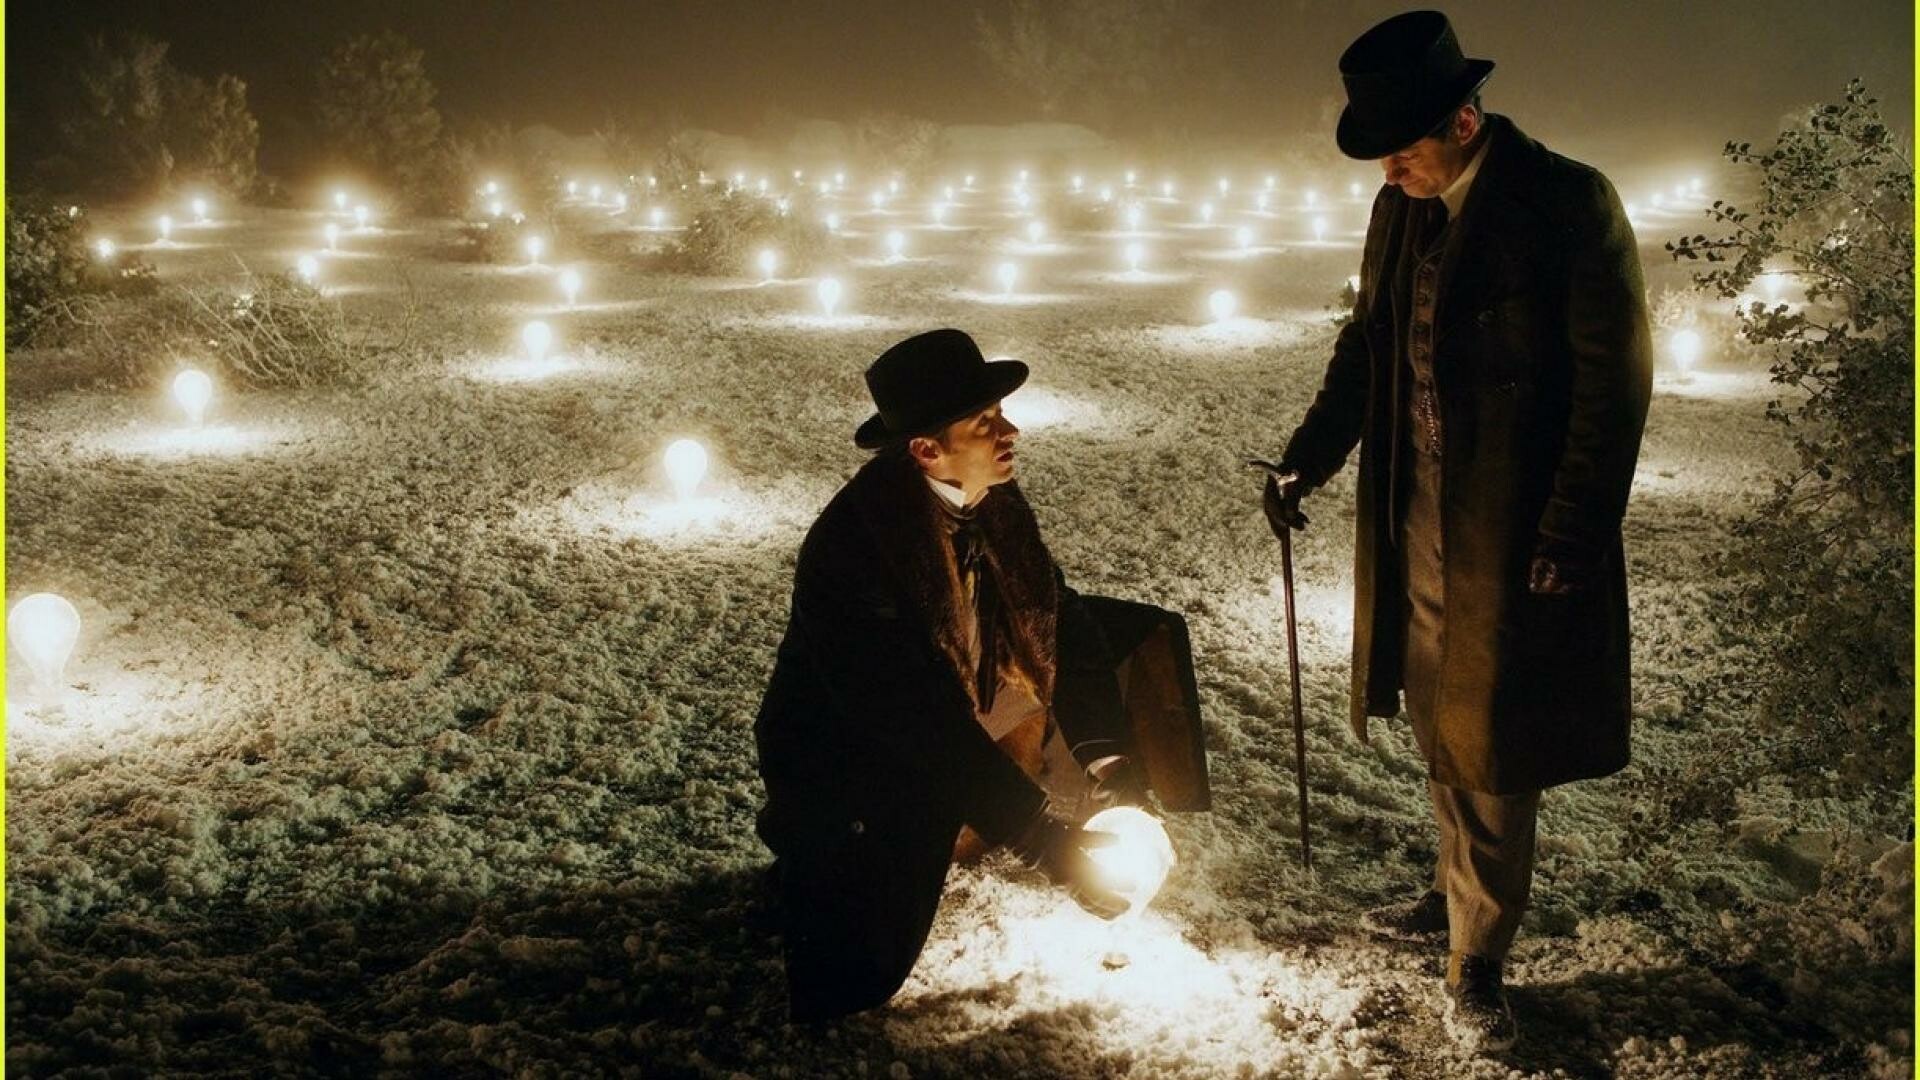 The Prestige: The film was released on October 20, 2006, Hugh Jackman and Andy Serkis. 1920x1080 Full HD Wallpaper.